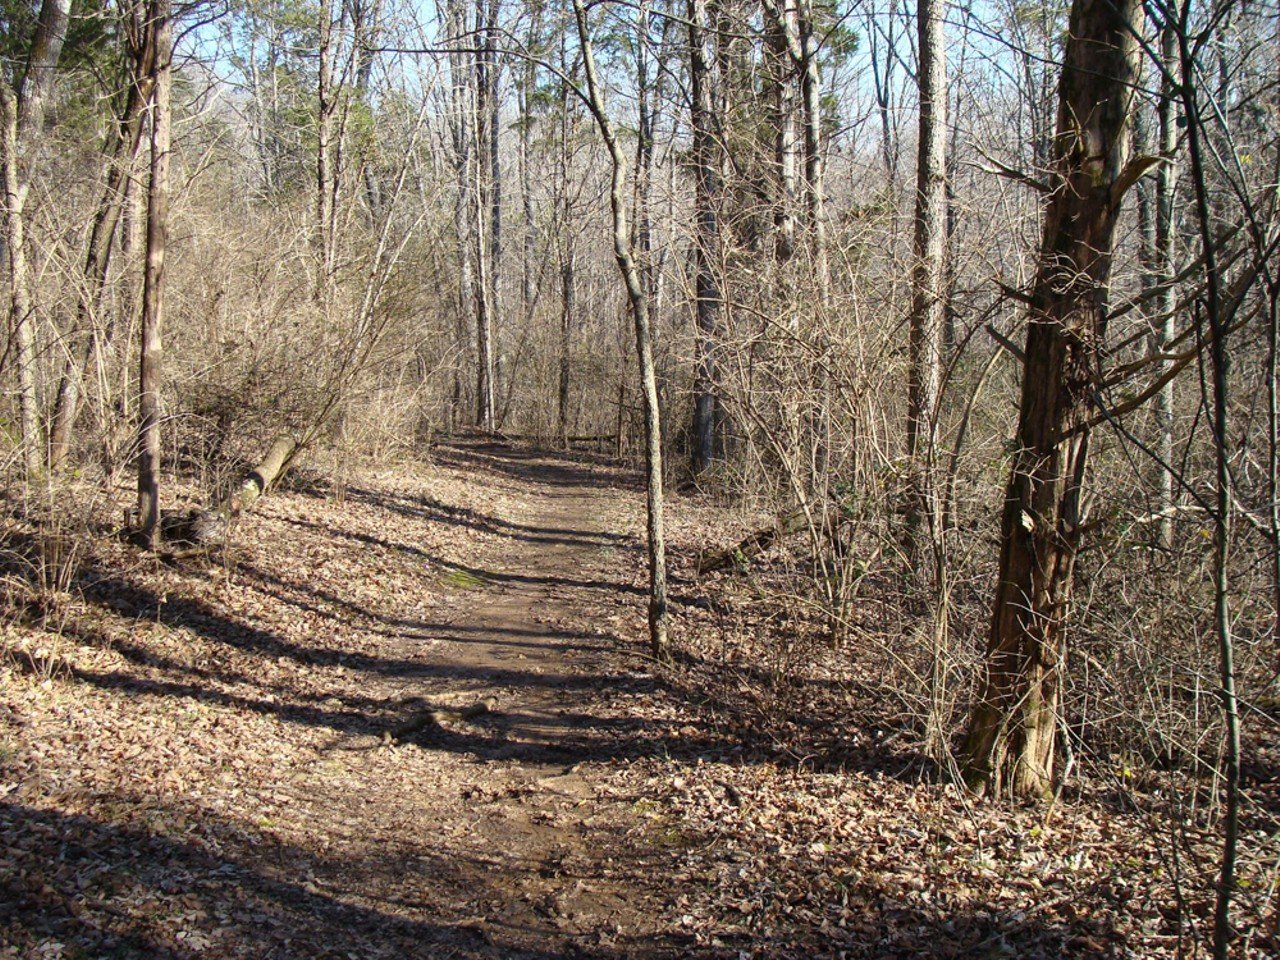 Charlestown State Park Trail No. 2
12500 IN-62, Charlestown, IN
Trail No. 2 is a 1.3-mile loop that takes you through an open woodland before dropping into hilly terrain that runs parallel to a creek, which, water levels permitting, has a few, small waterfalls.